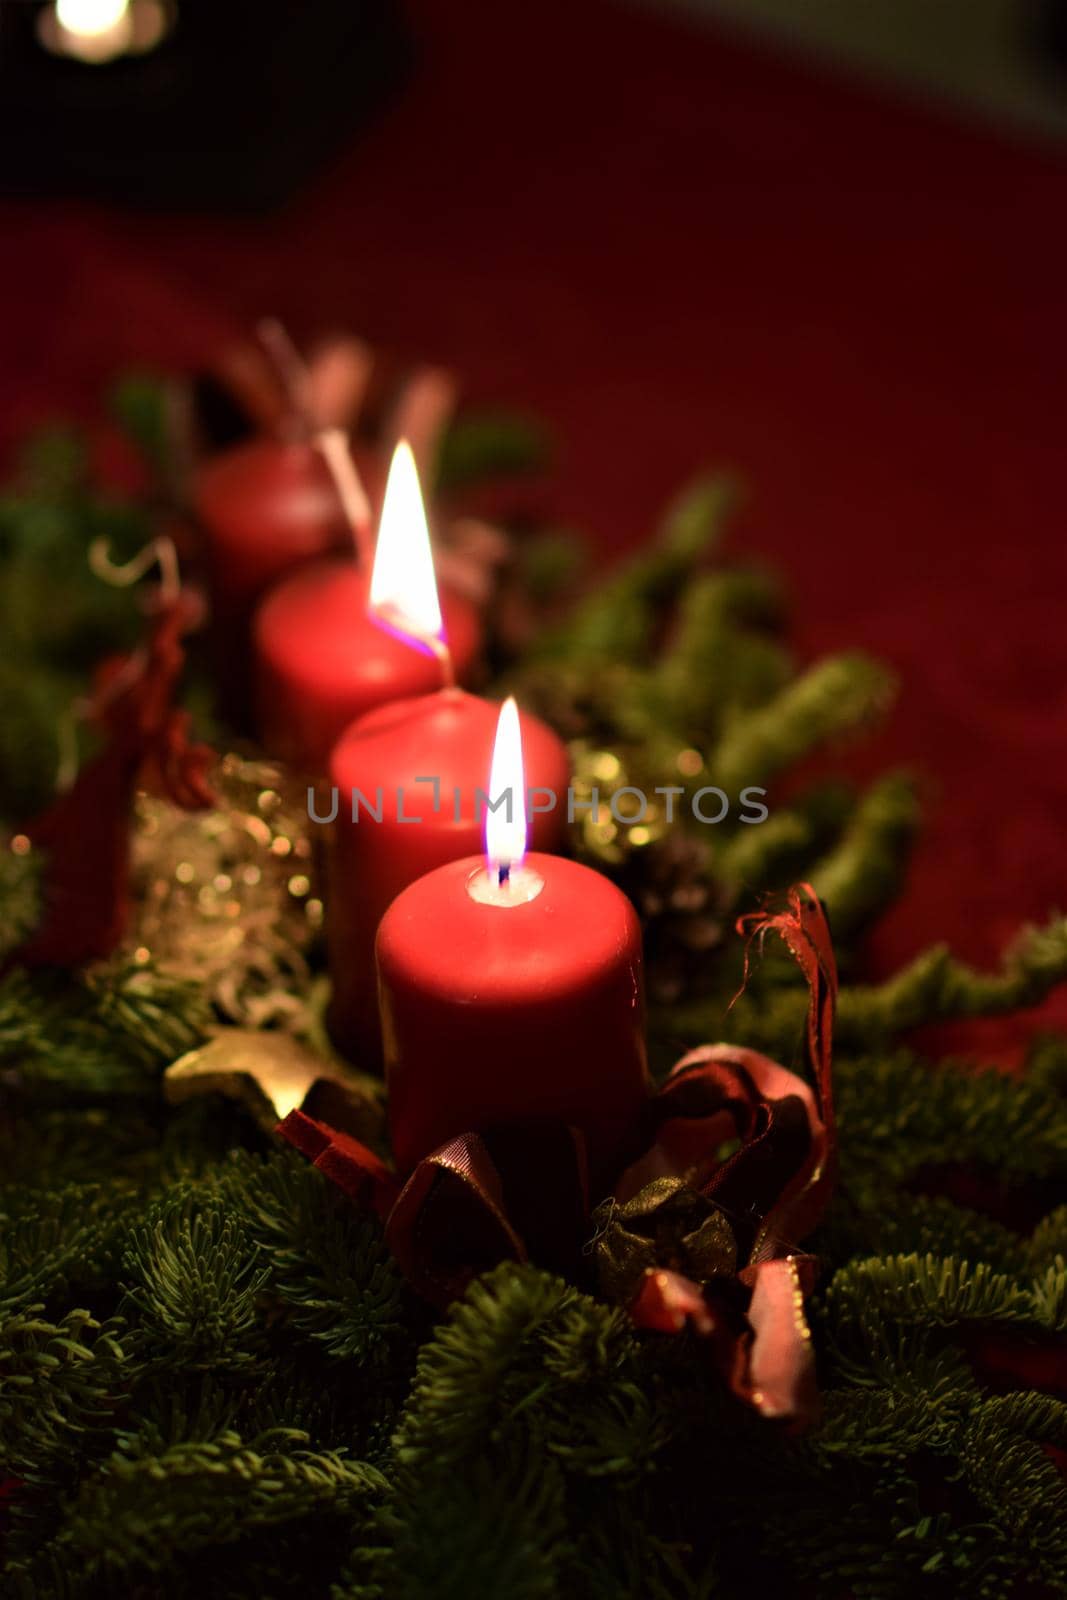 close up of an Advent arrangement with 2 burning candles by Luise123